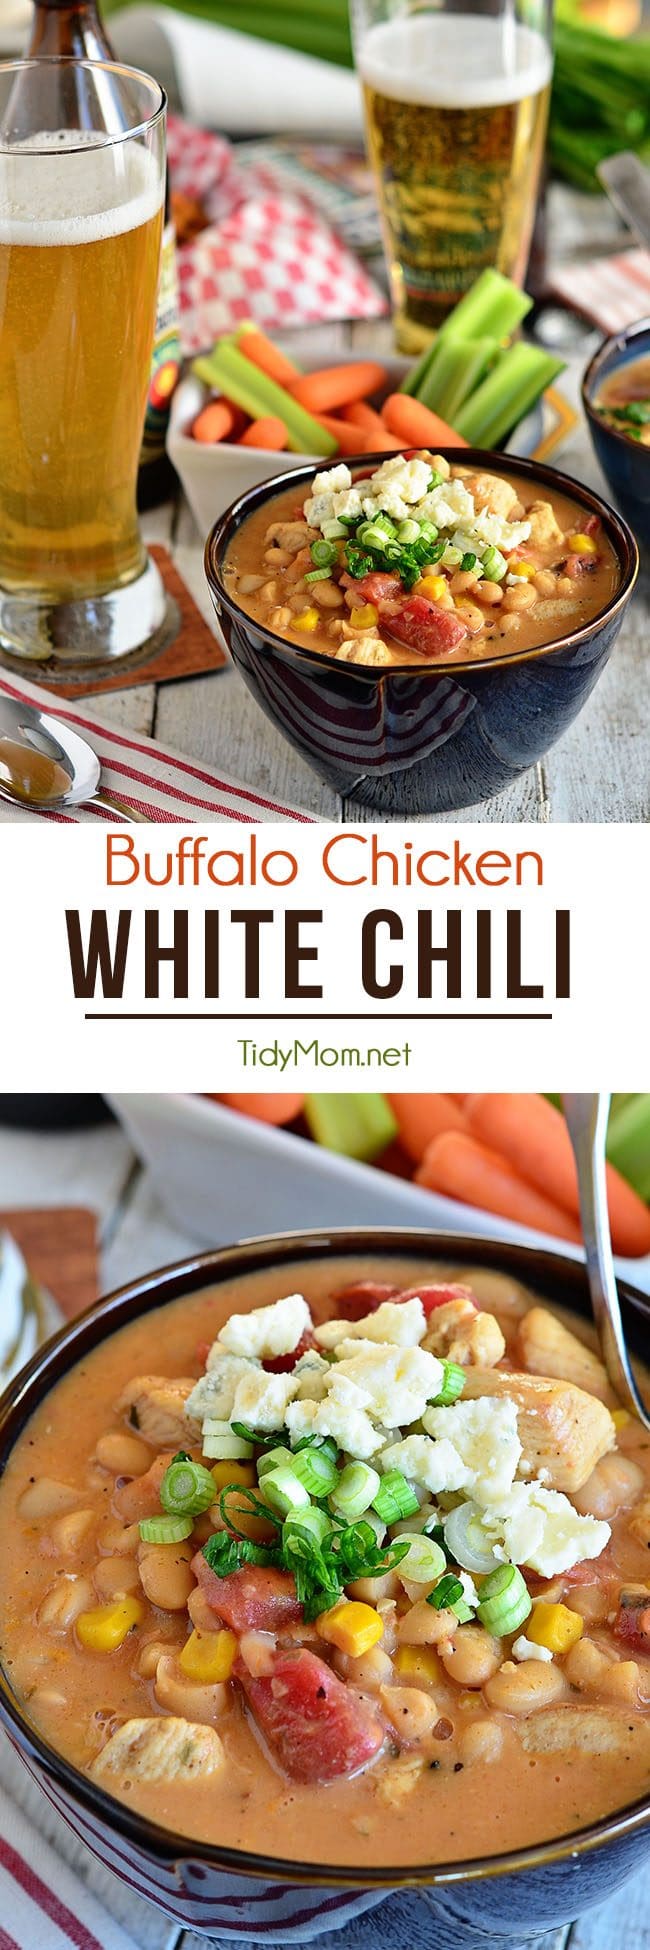 This easy Buffalo Chicken White Chili recipe is a keeper! It has a nice mild heat from the buffalo sauce and fire roasted tomatoes, while the sweet corn, Bush's White Chili Beans and ranch dressing mix really make this chili something special. The chili is creamy, rich and bold. Fills you up and keeps you warm. It earns a spot in our dinner rotation. Get the recipe at TidyMom.net